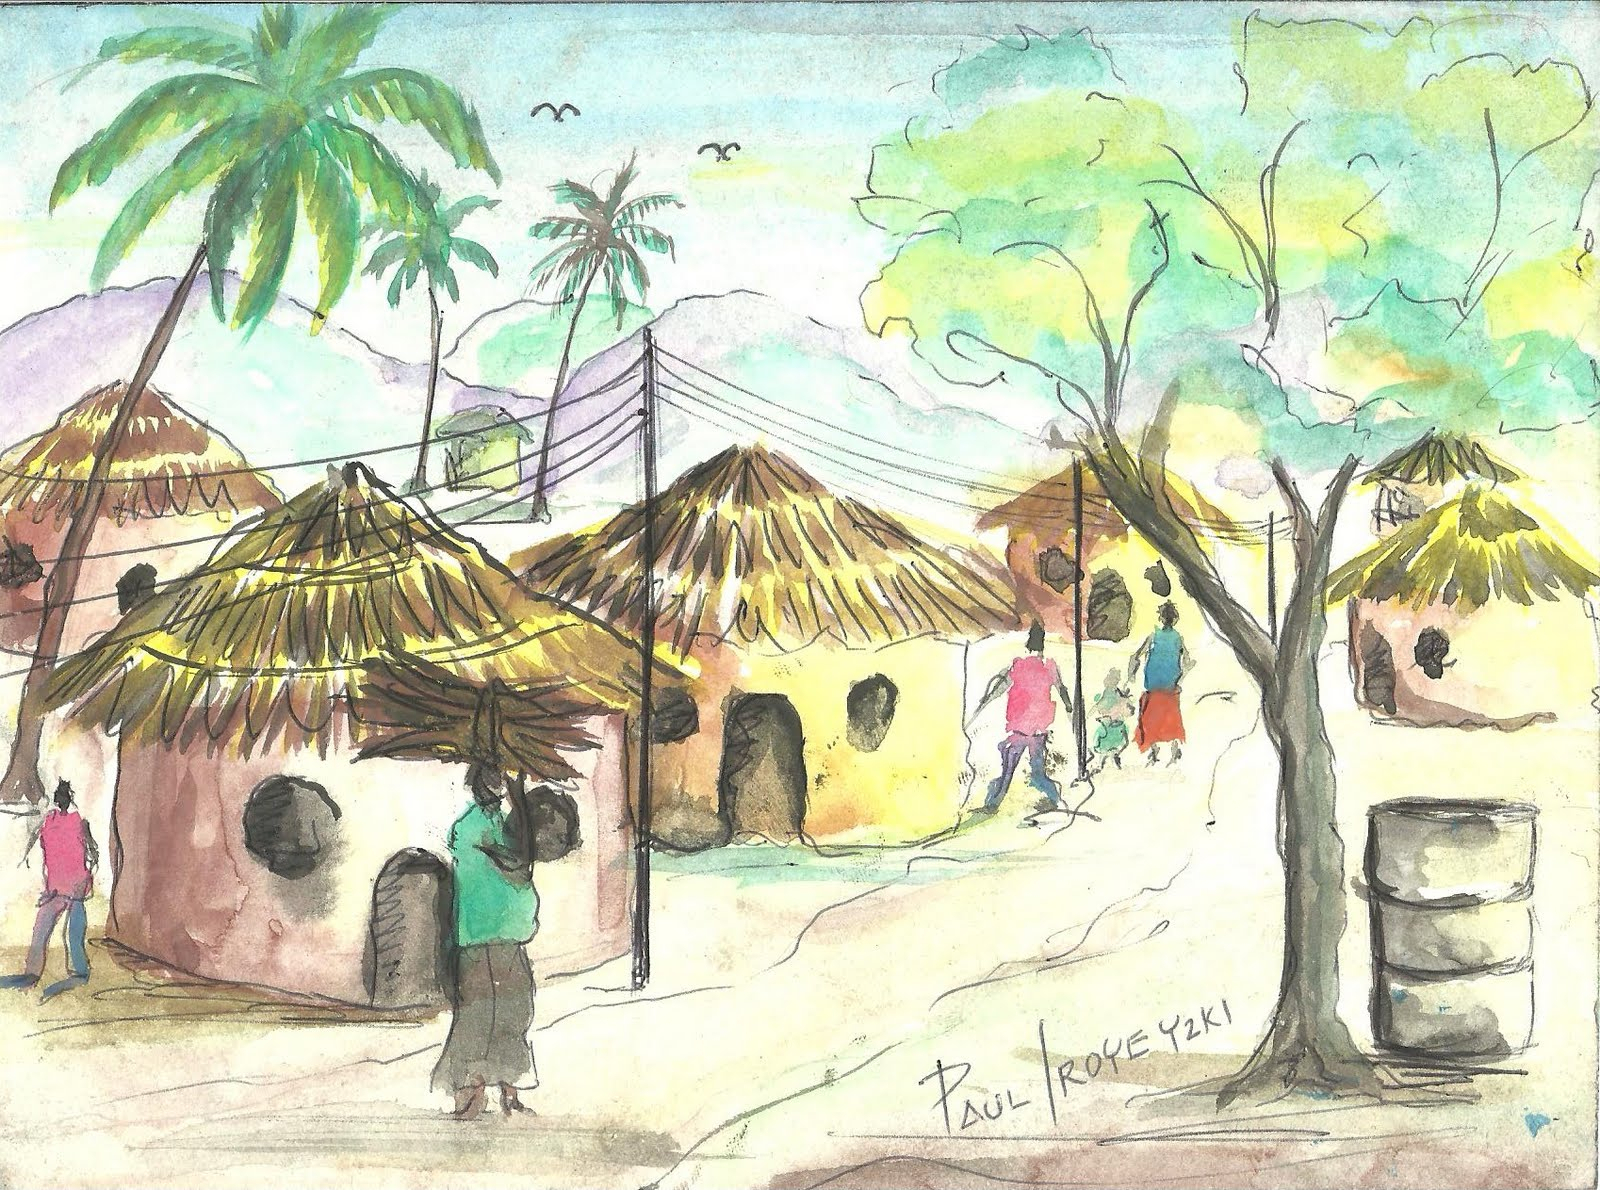 Sketch Of Village Scenery at Explore collection of